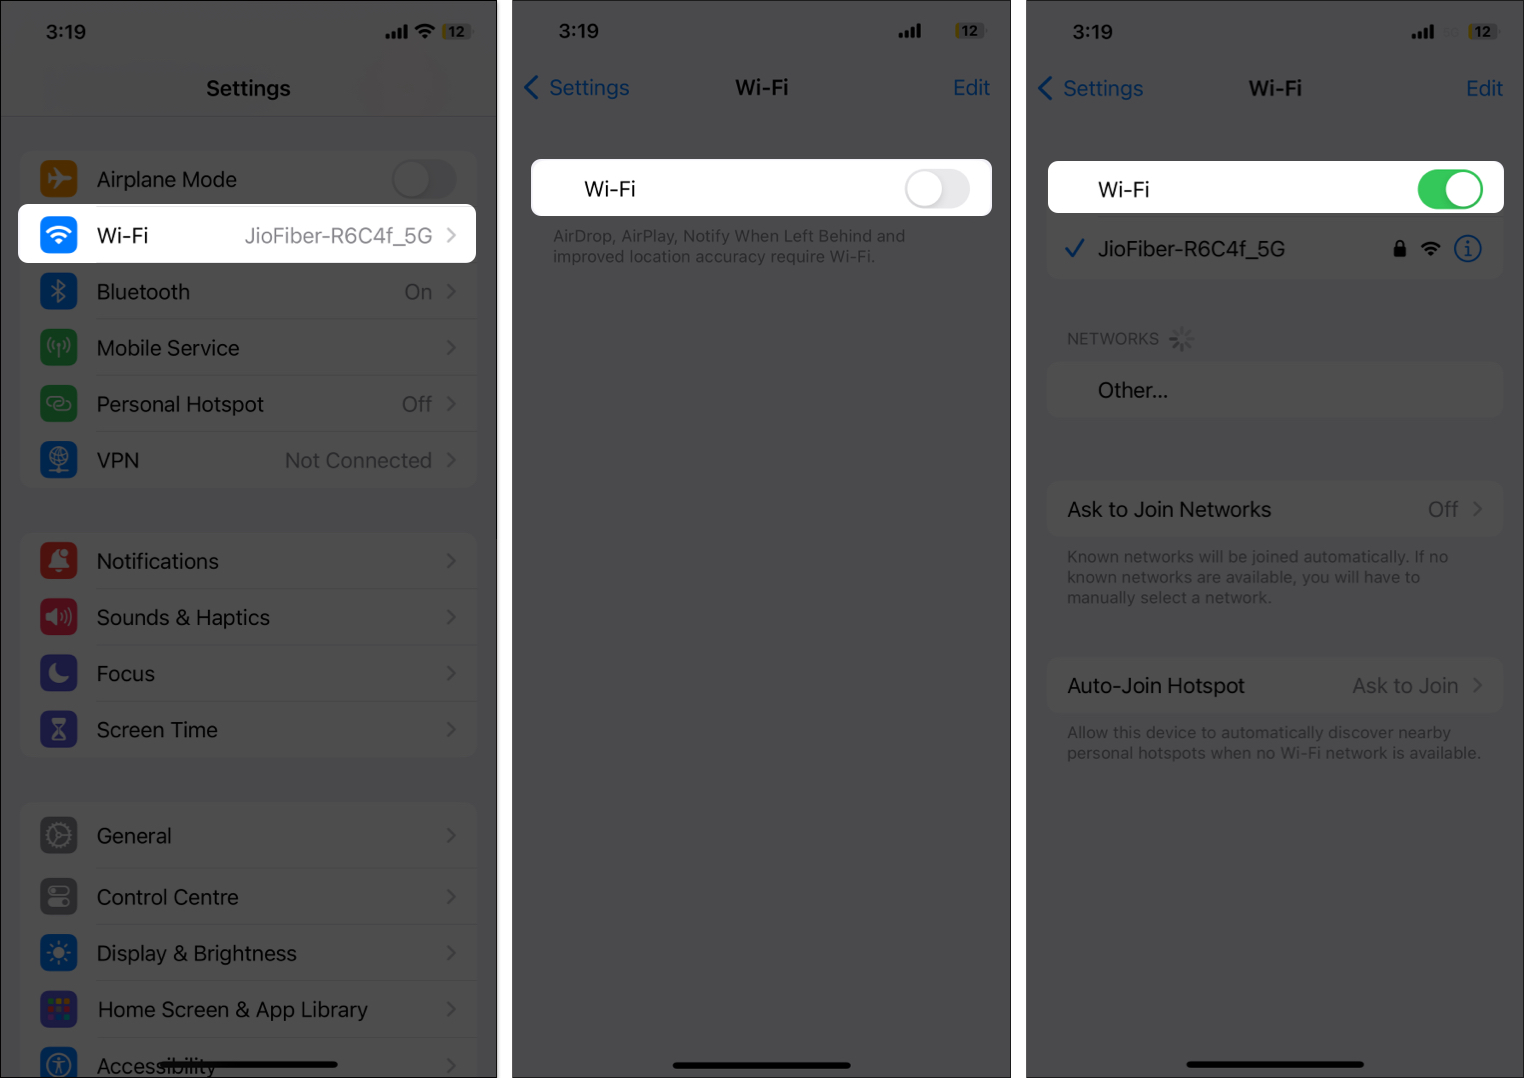 Toggle Wi-Fi off and on again on iPhone